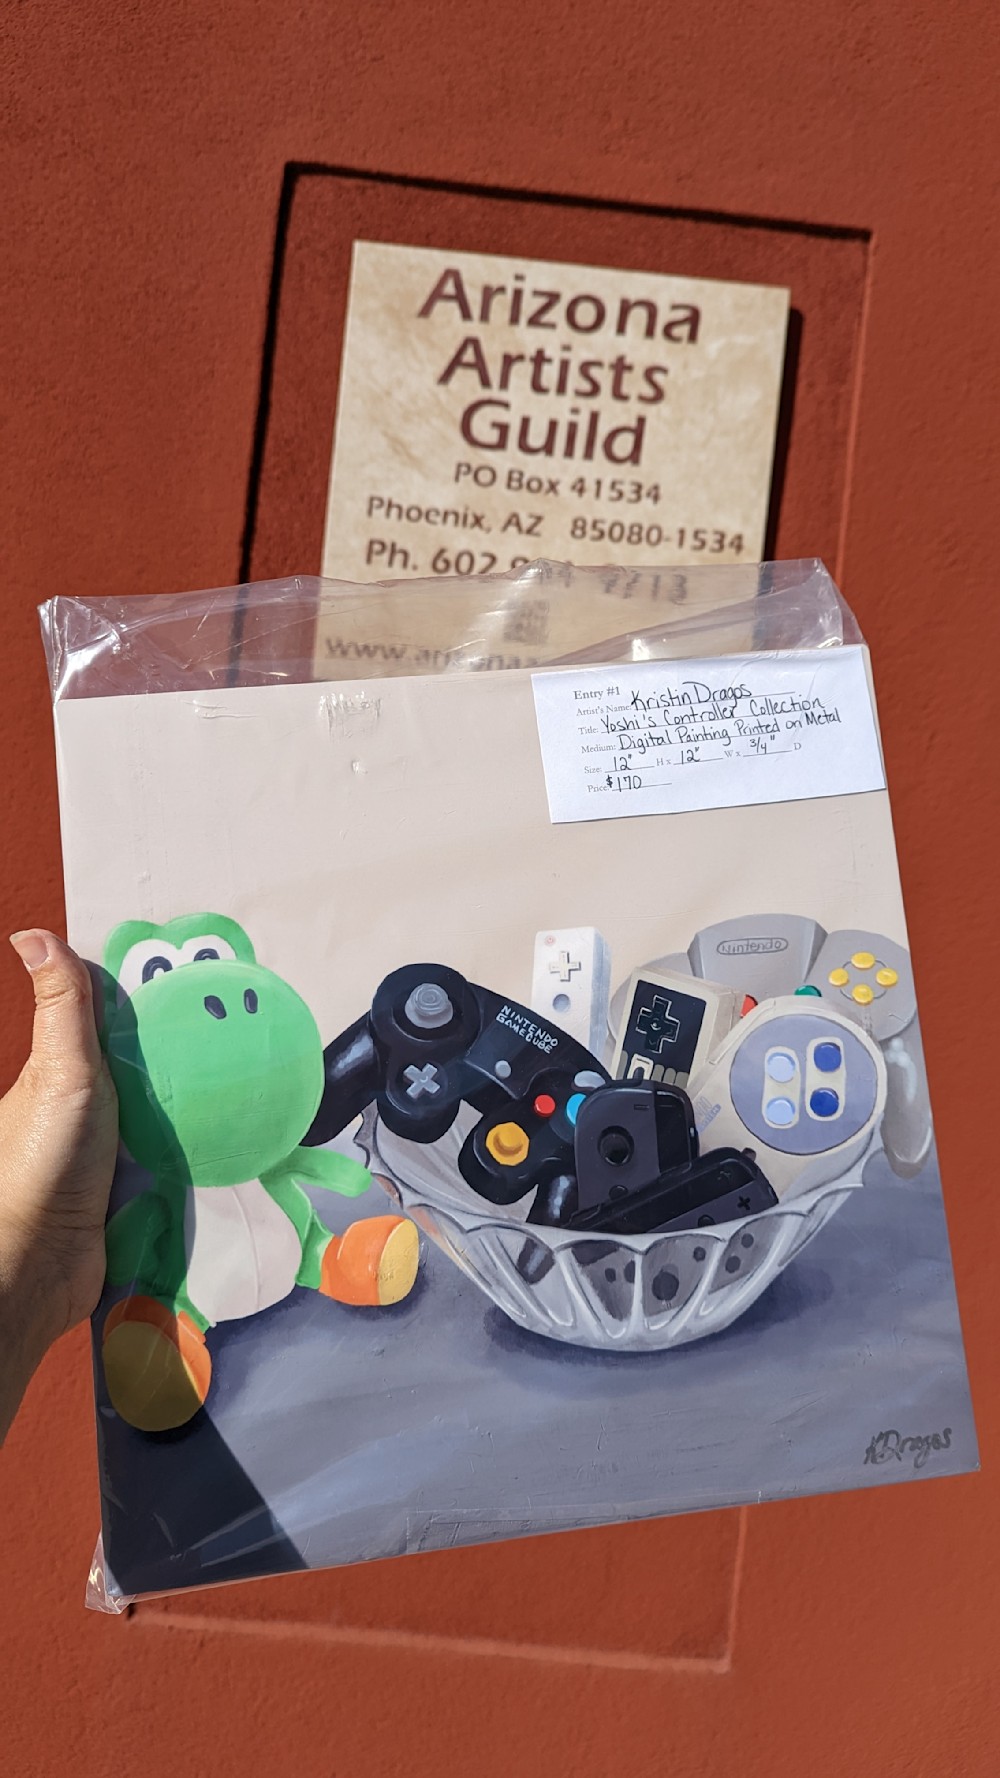 Yoshi's Controller Collection goes to the Winter Exhibition at the Arizona Artists Guild.